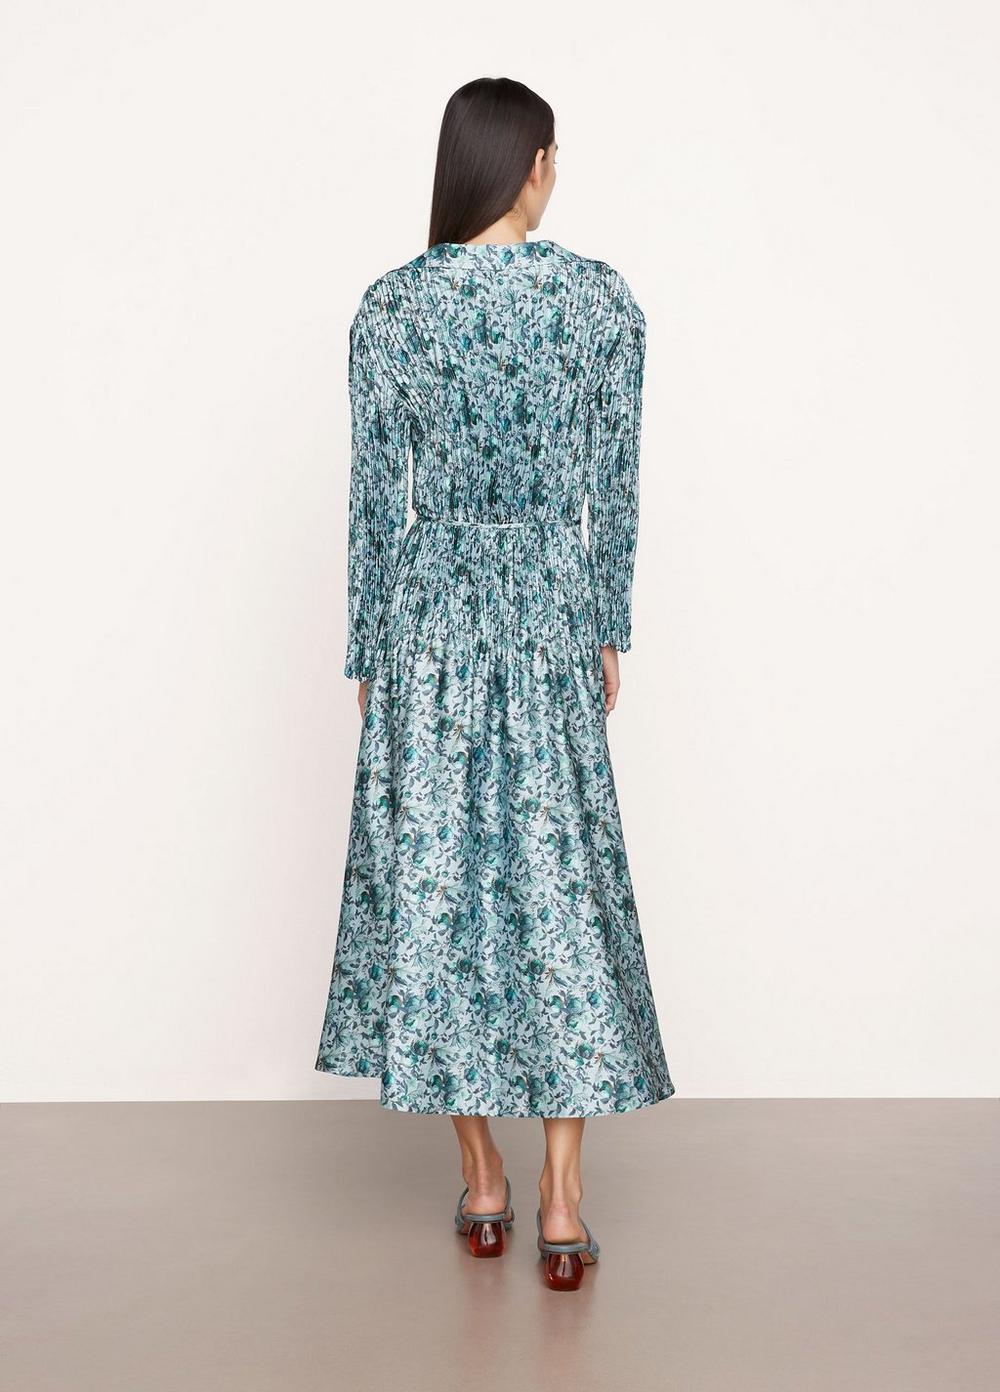 Vince | Berry Blooms Pleated Shirt Dress in Ocean | Vince Unfold